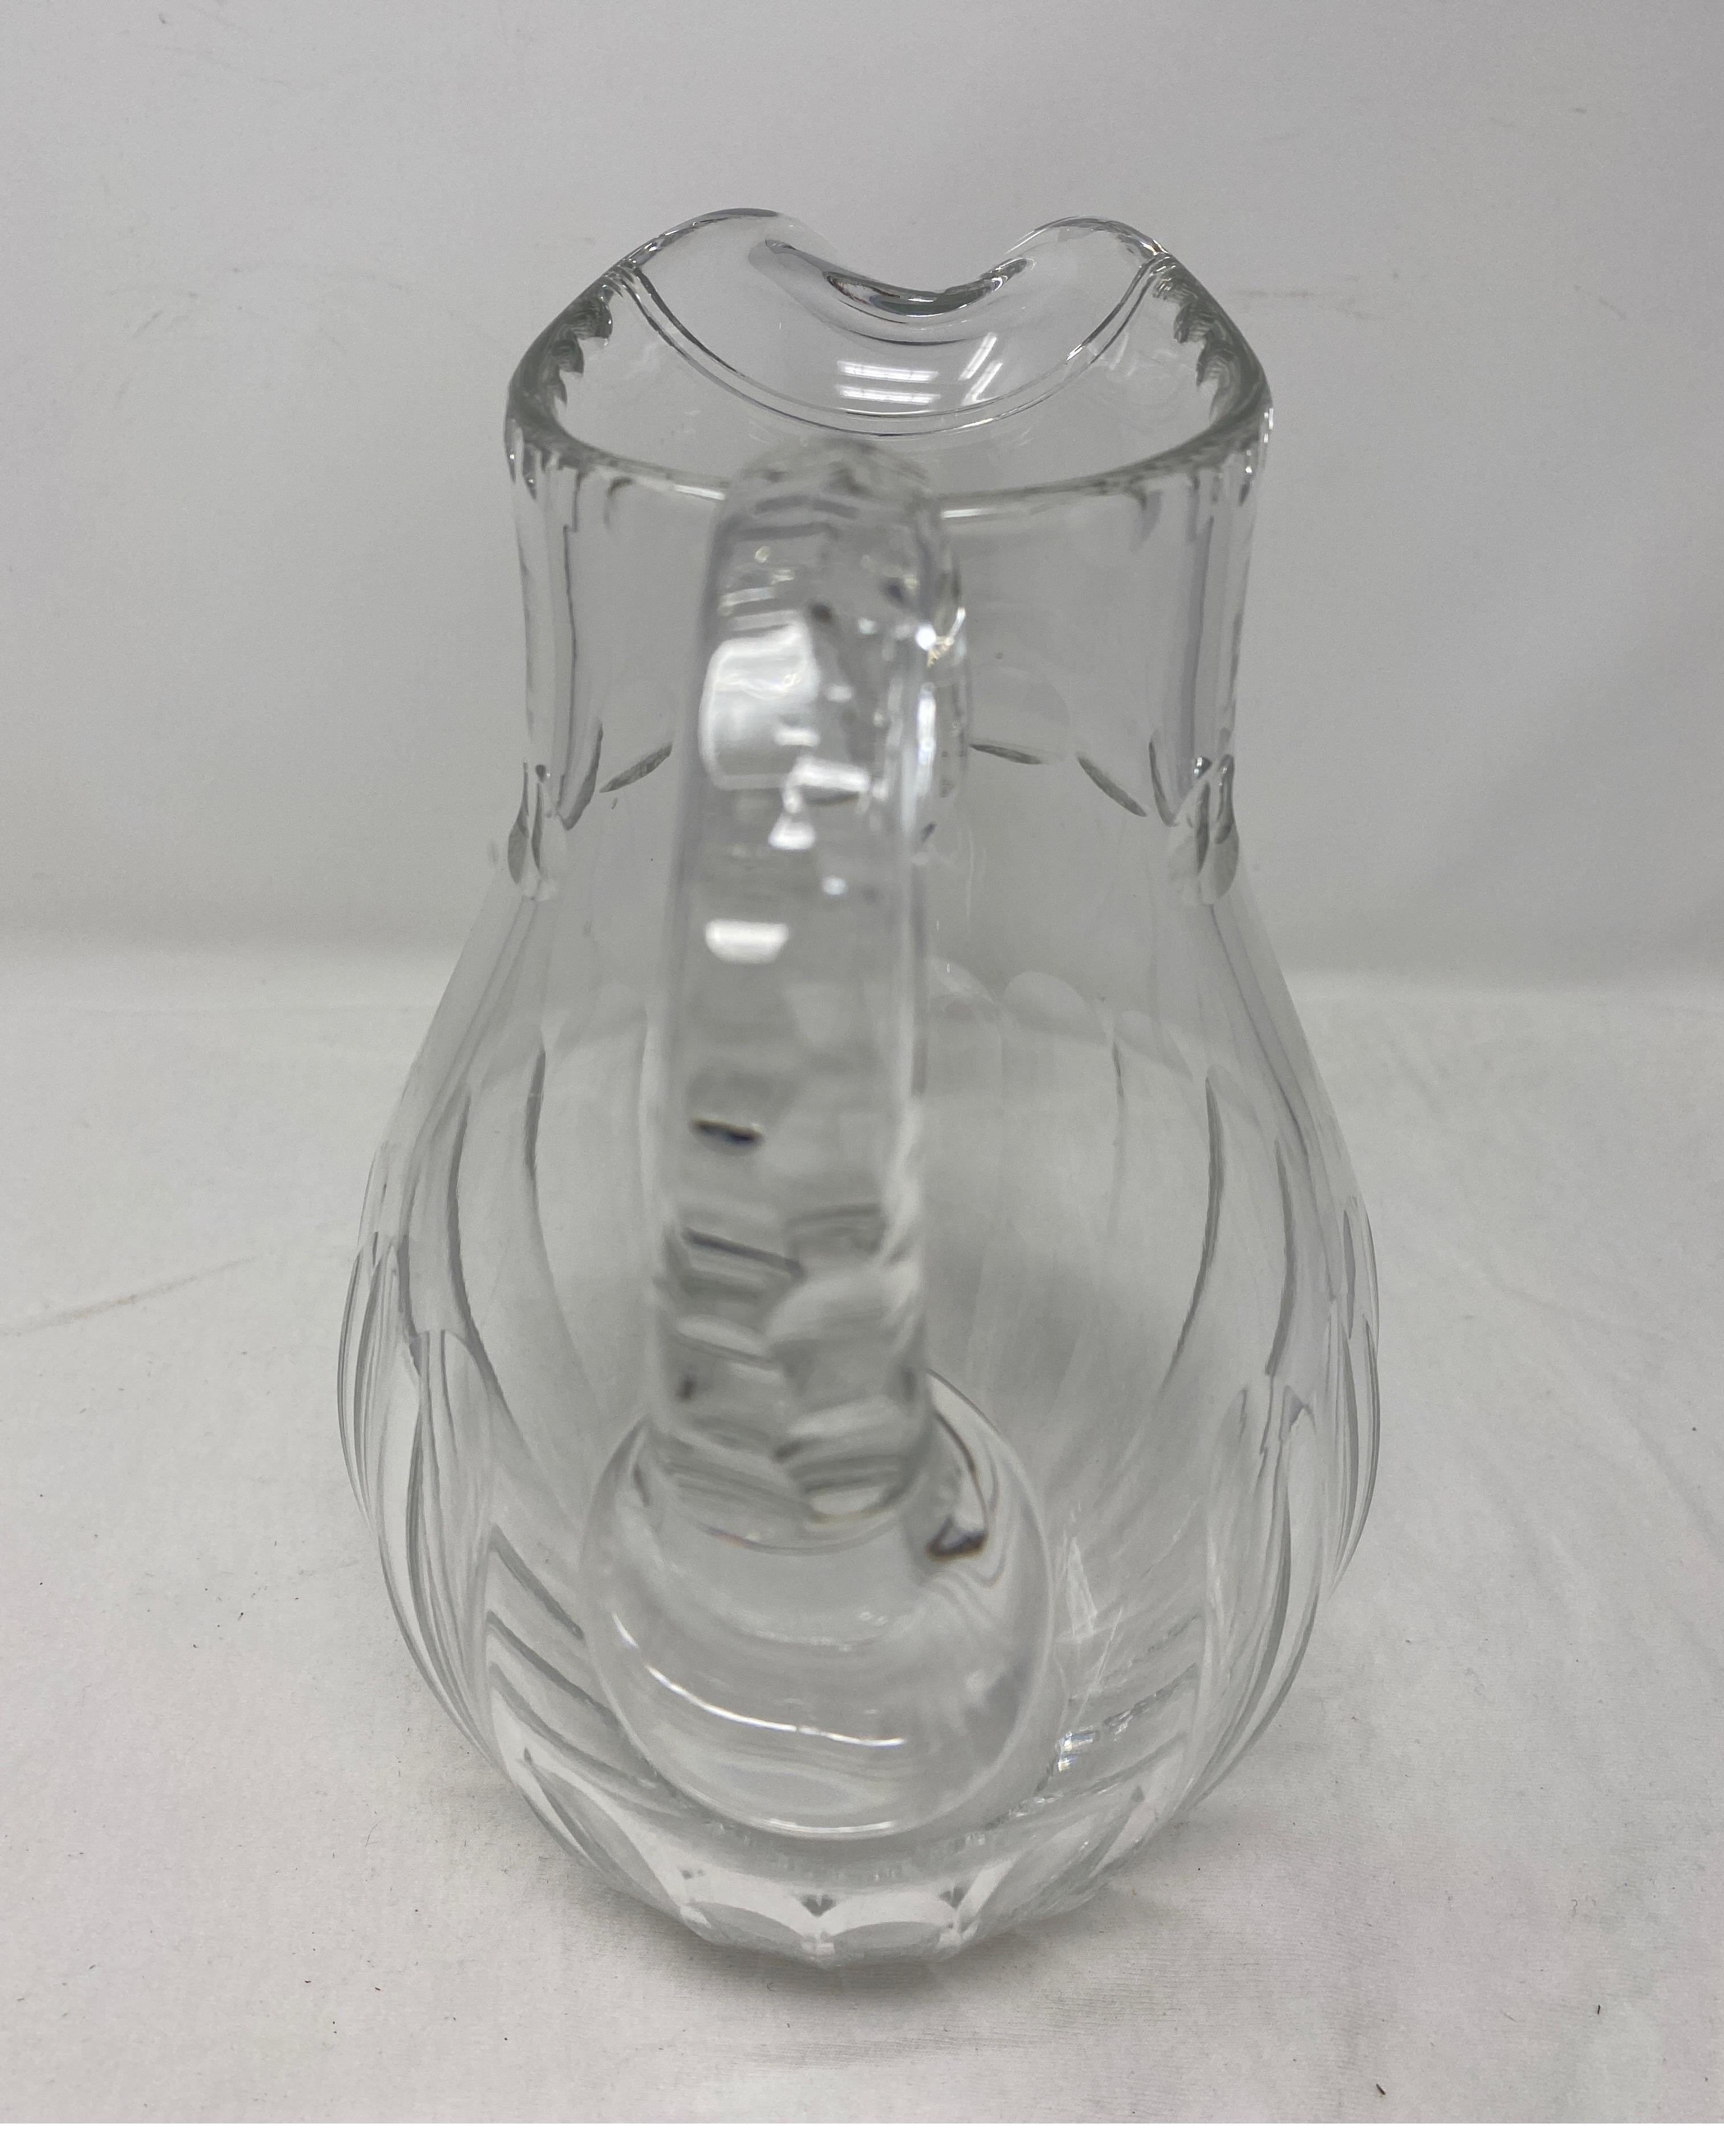 Antique crystal pitcher, 19th century.
5.5